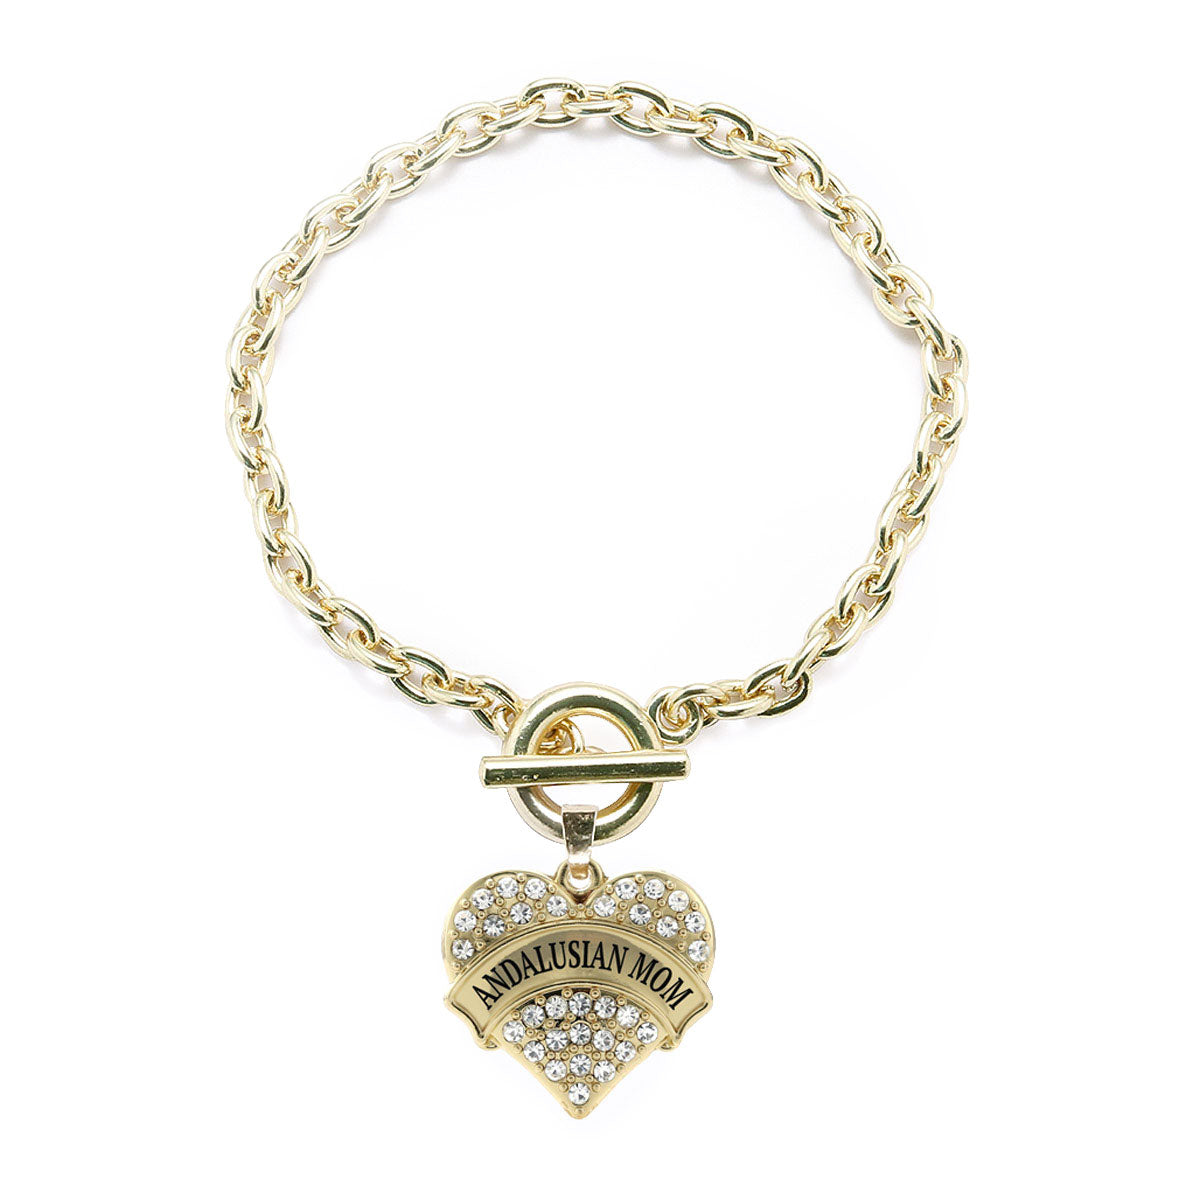 Gold Andalusian Mom Pave Heart Charm Toggle Bracelet